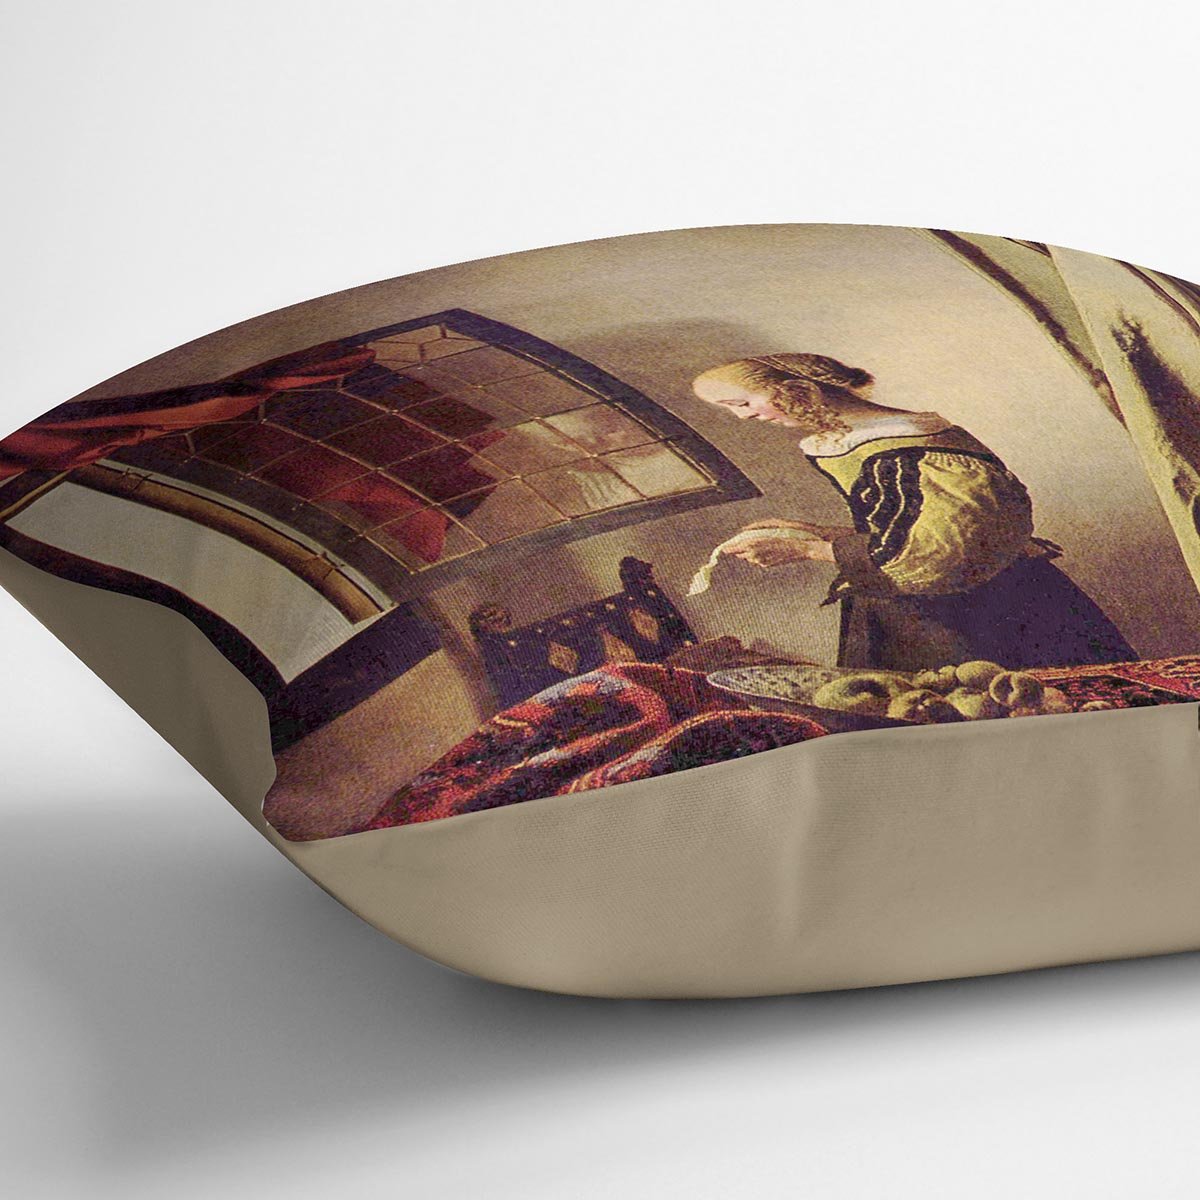 Girls at the open window by Vermeer Cushion